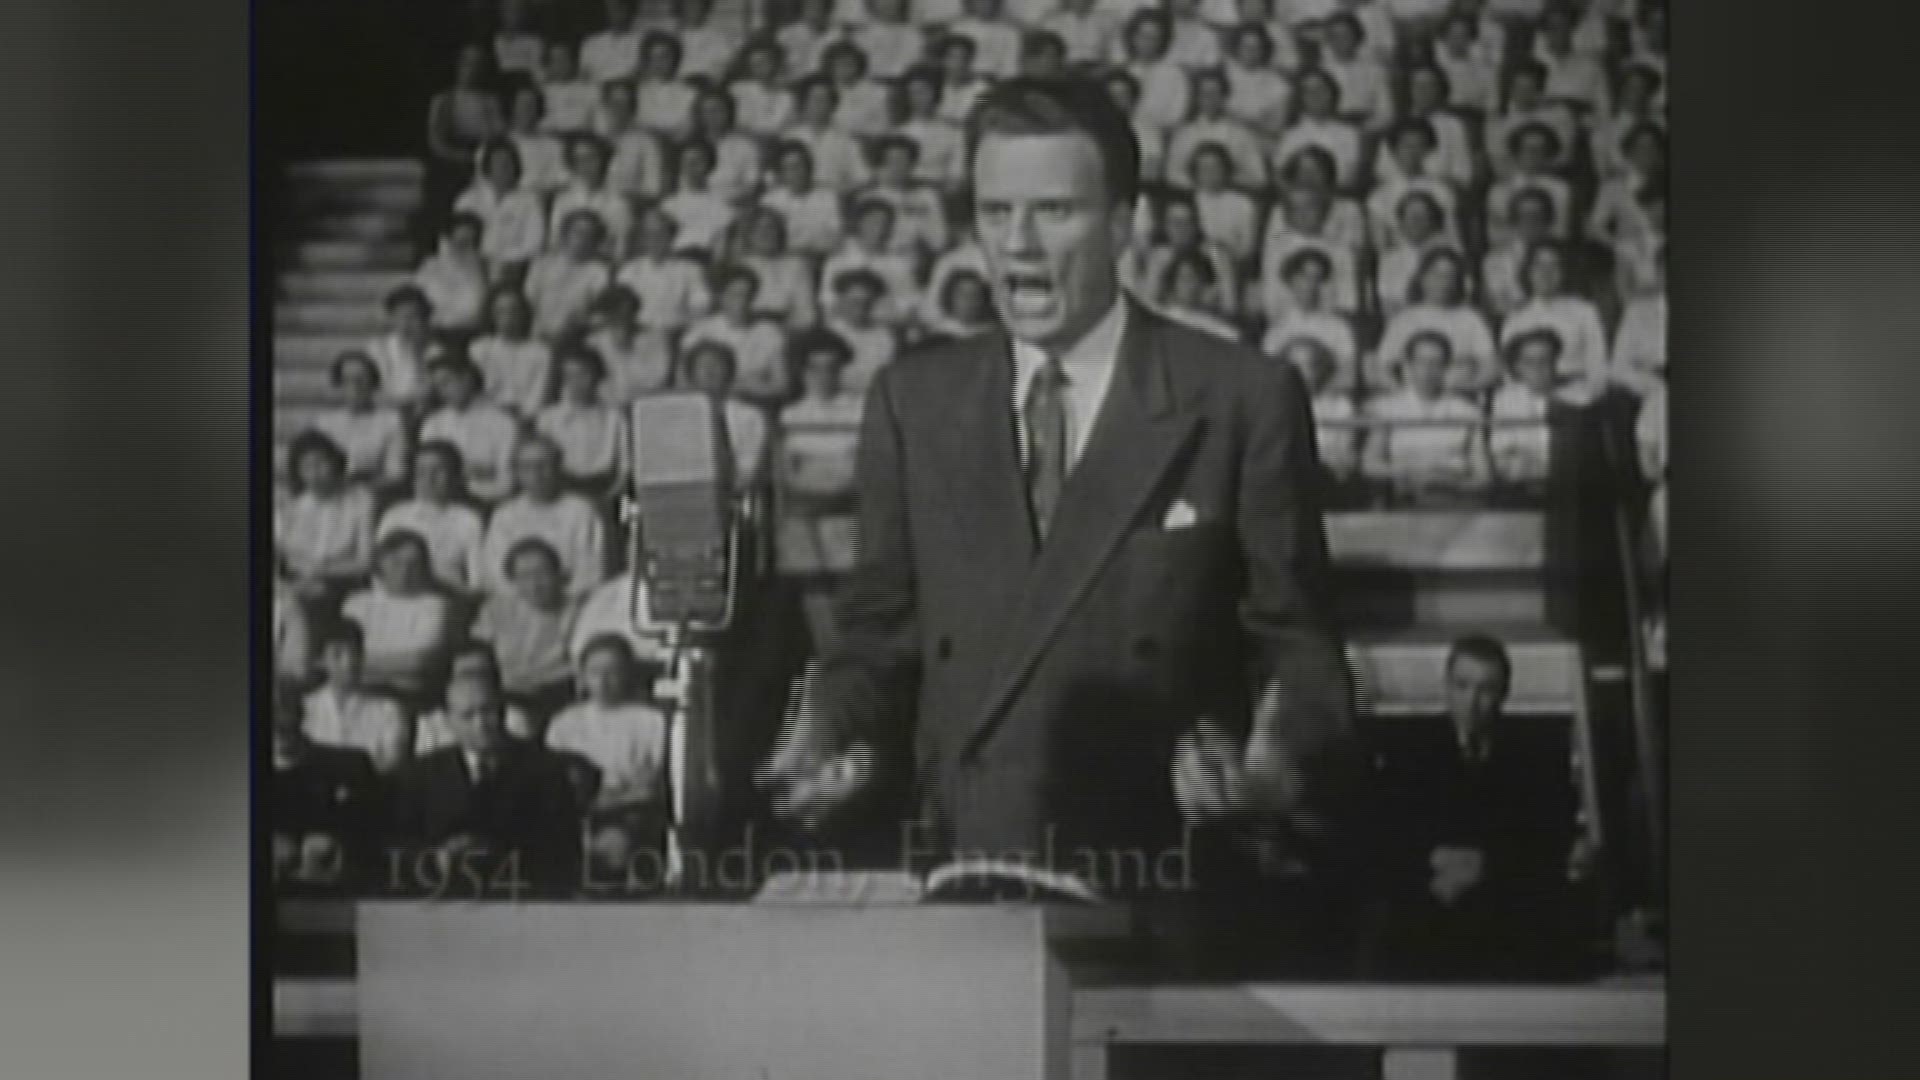 "My home is in Heaven. I'm just traveling through this world." The famed evangelist Rev. Billy Graham has passed away at age 99, NBC News reports.